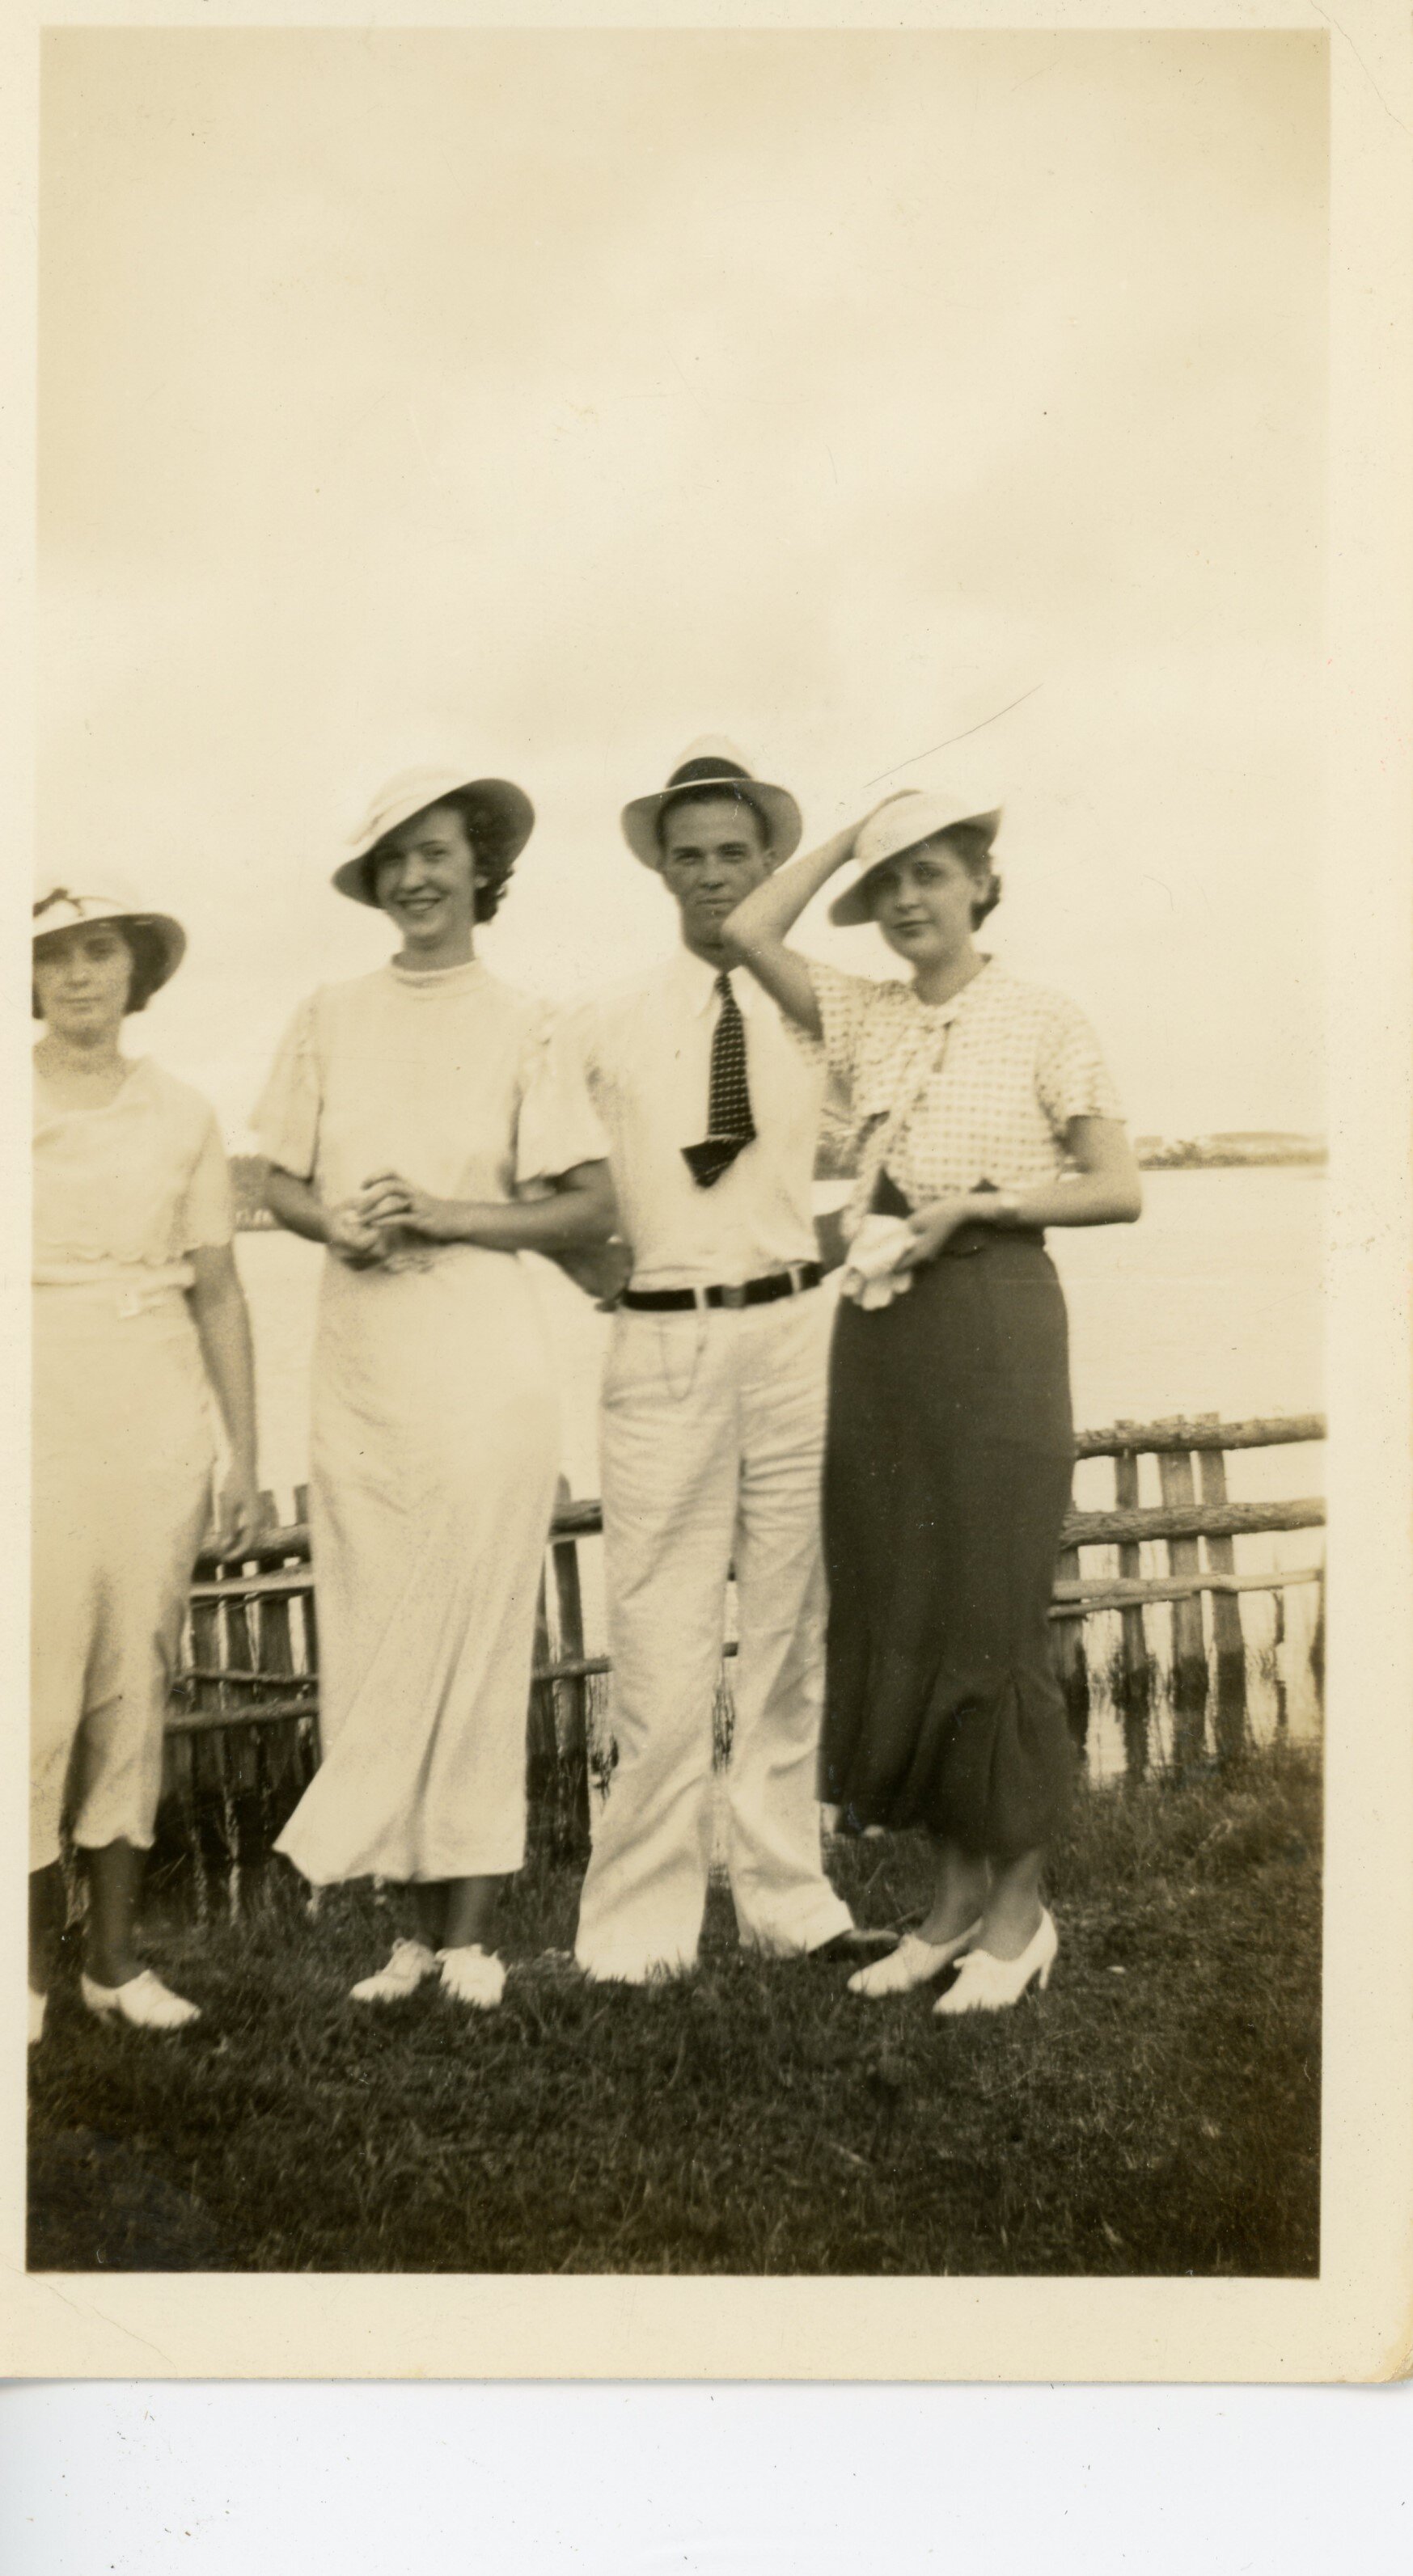 Orville Gaskill (only male in picture) and Dorothy Lewis Chadwick on far right